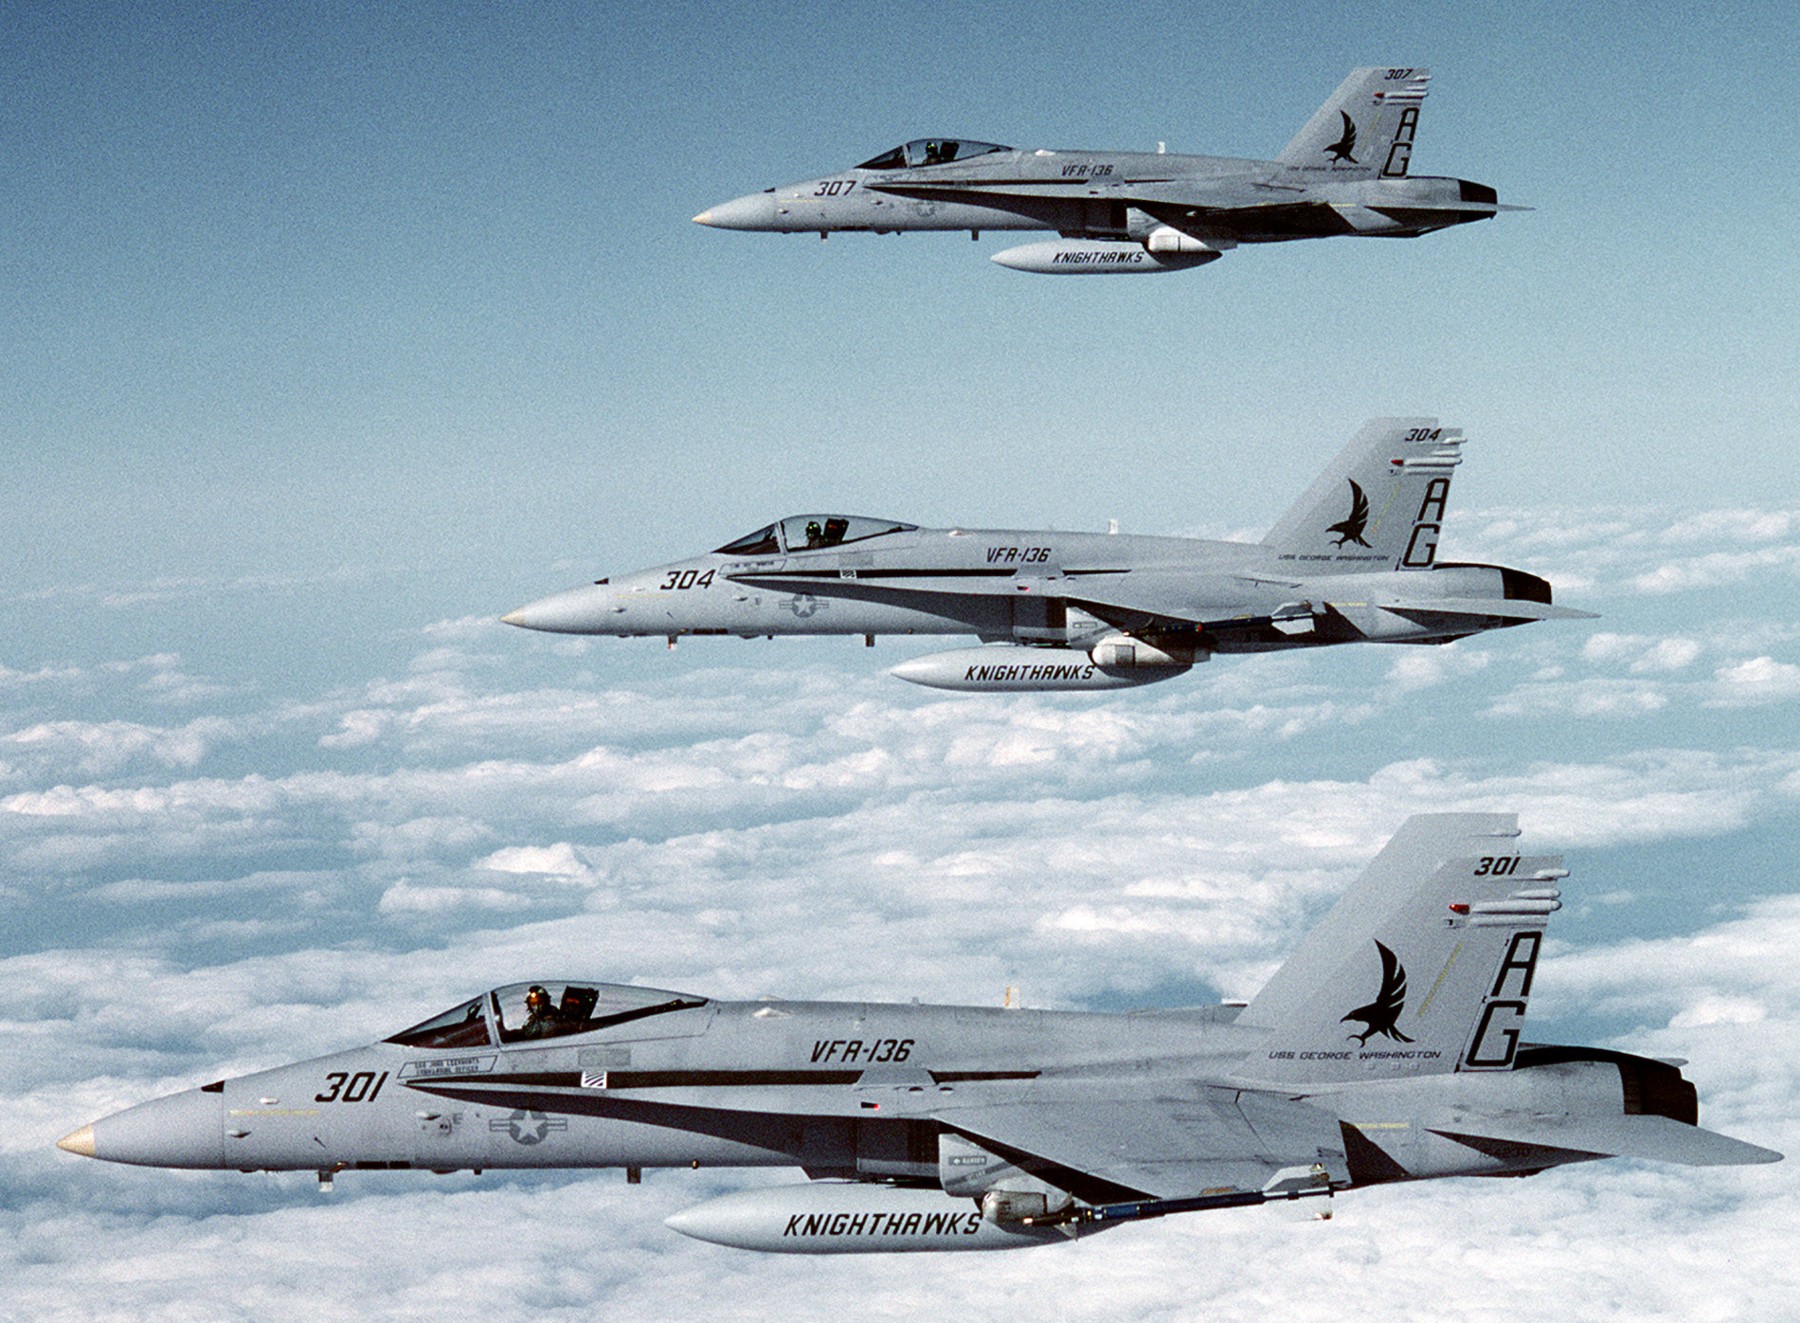 vfa-136 knighthawks strike fighter squadron f/a-18c hornet 1993 100 carrier air wing cvw-7